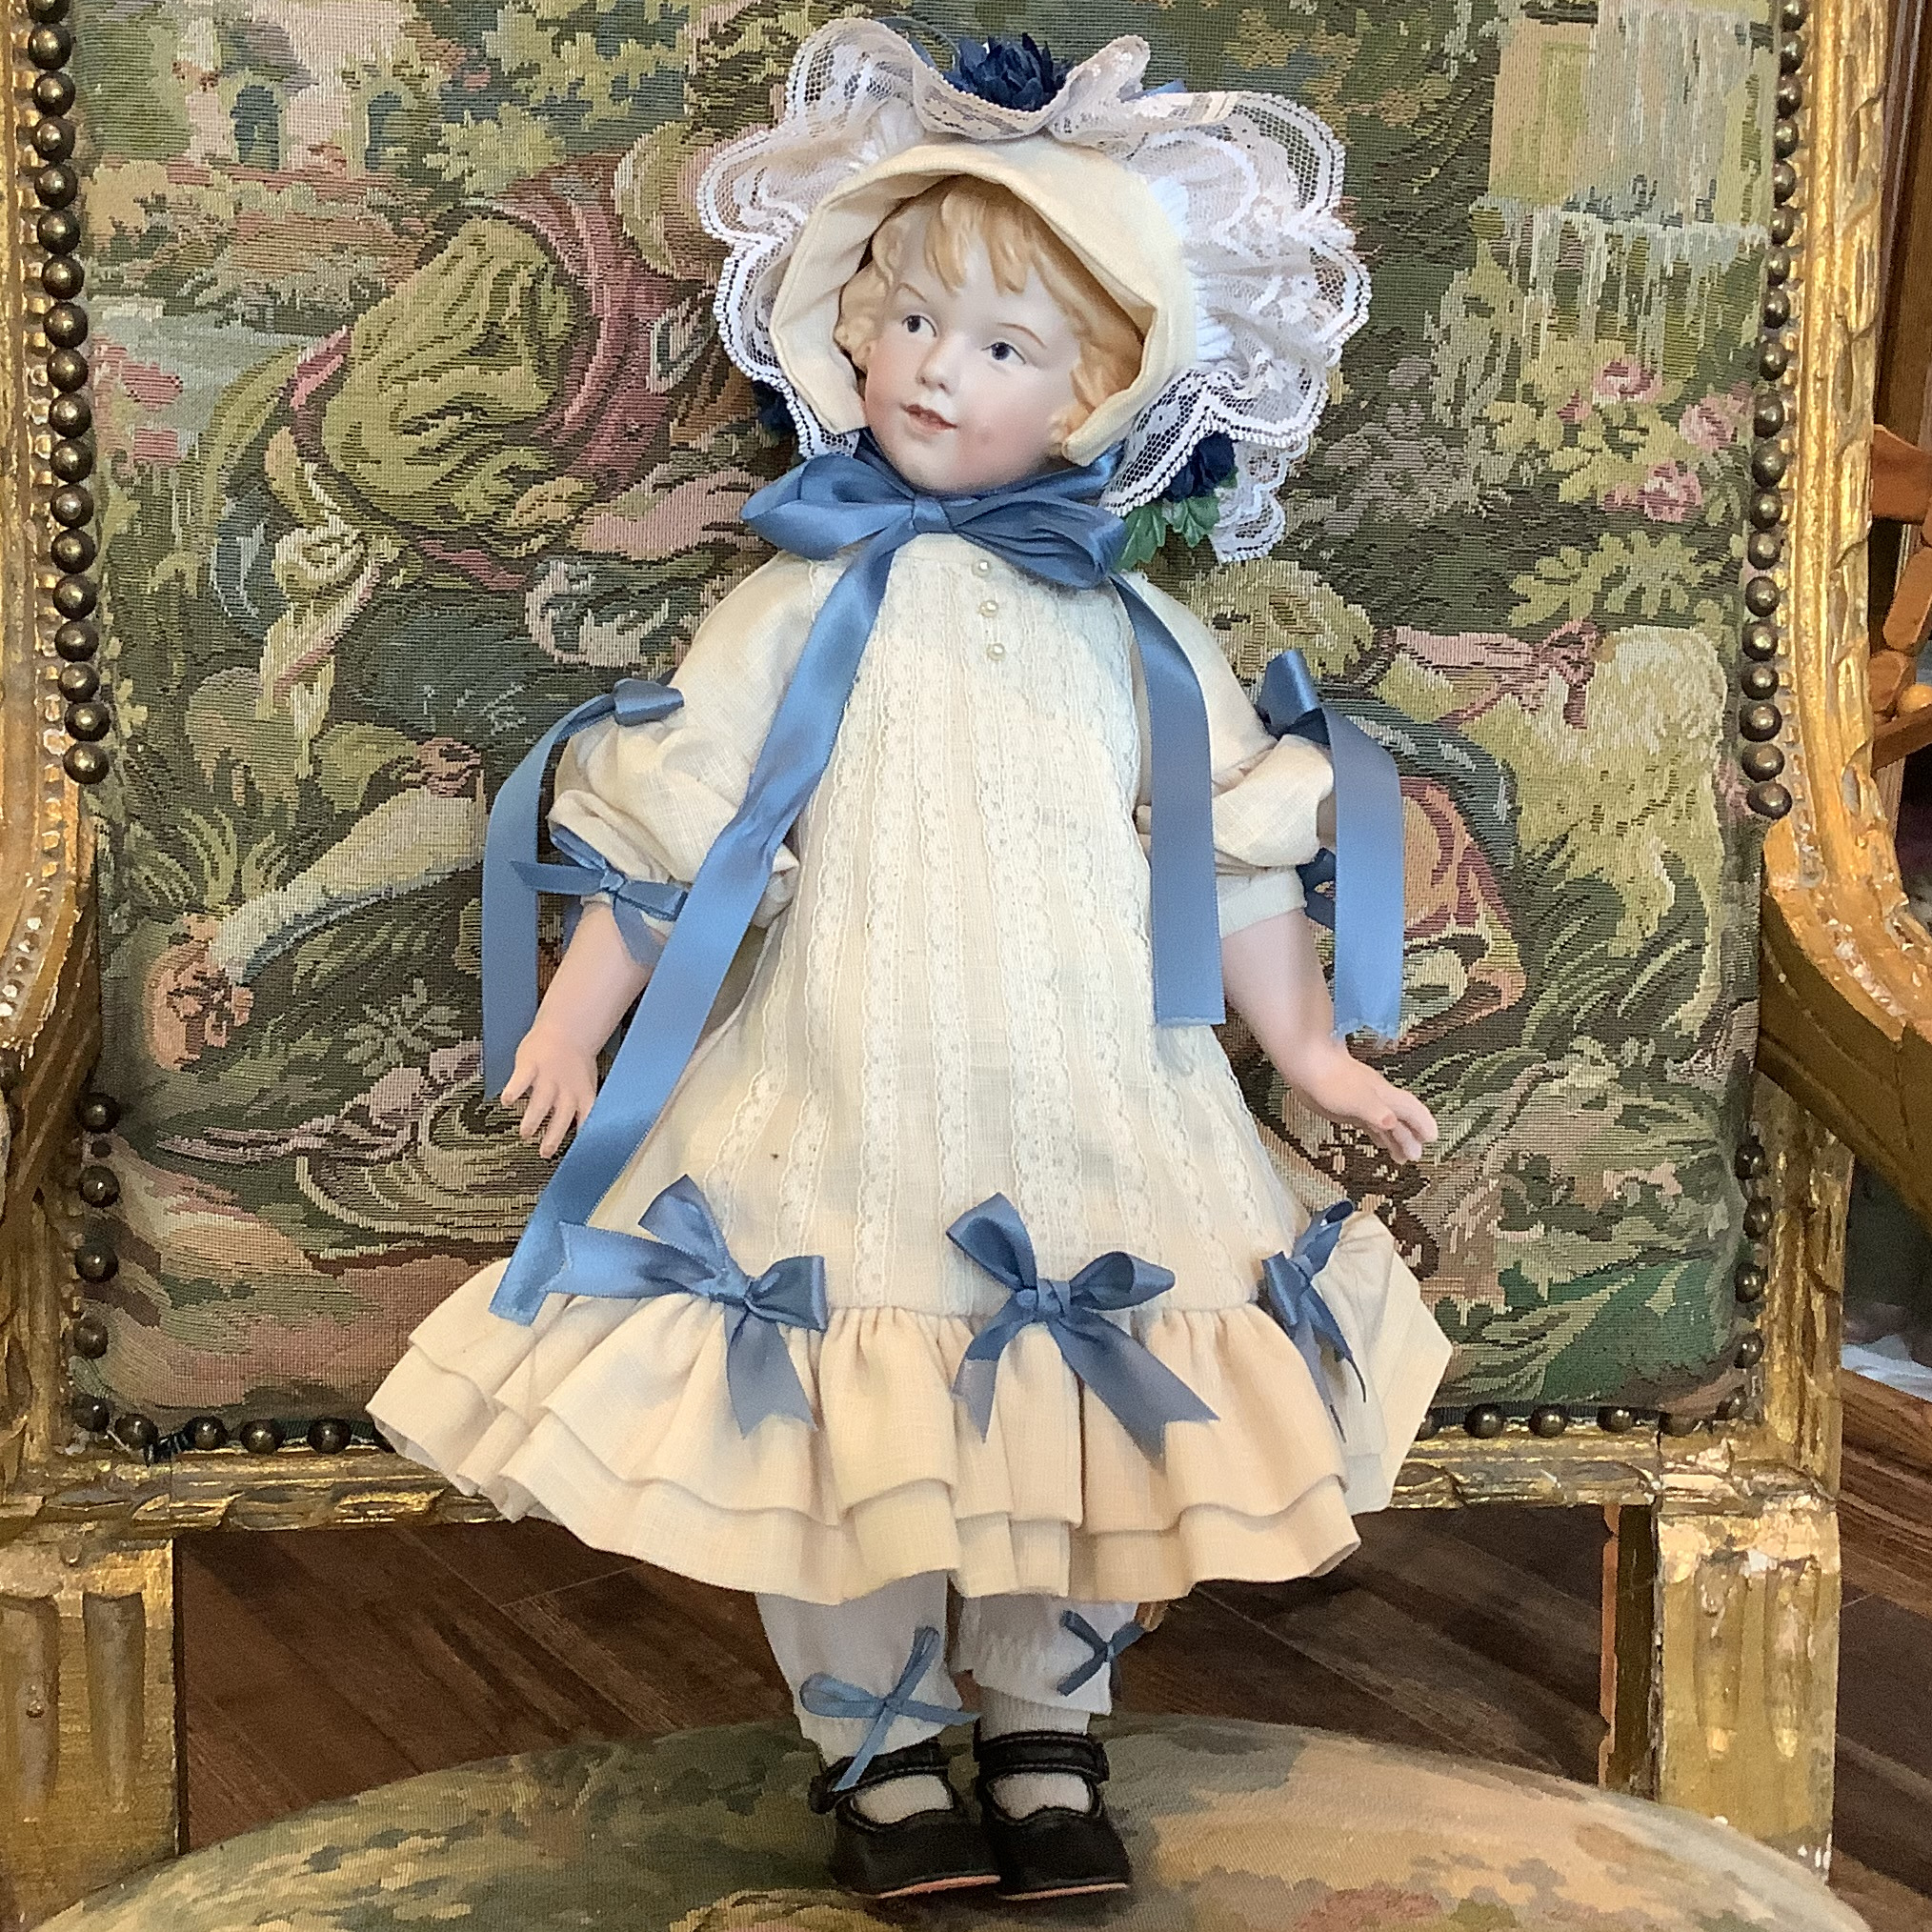 Reproduction Heubach character doll in white dress with blue ribbon